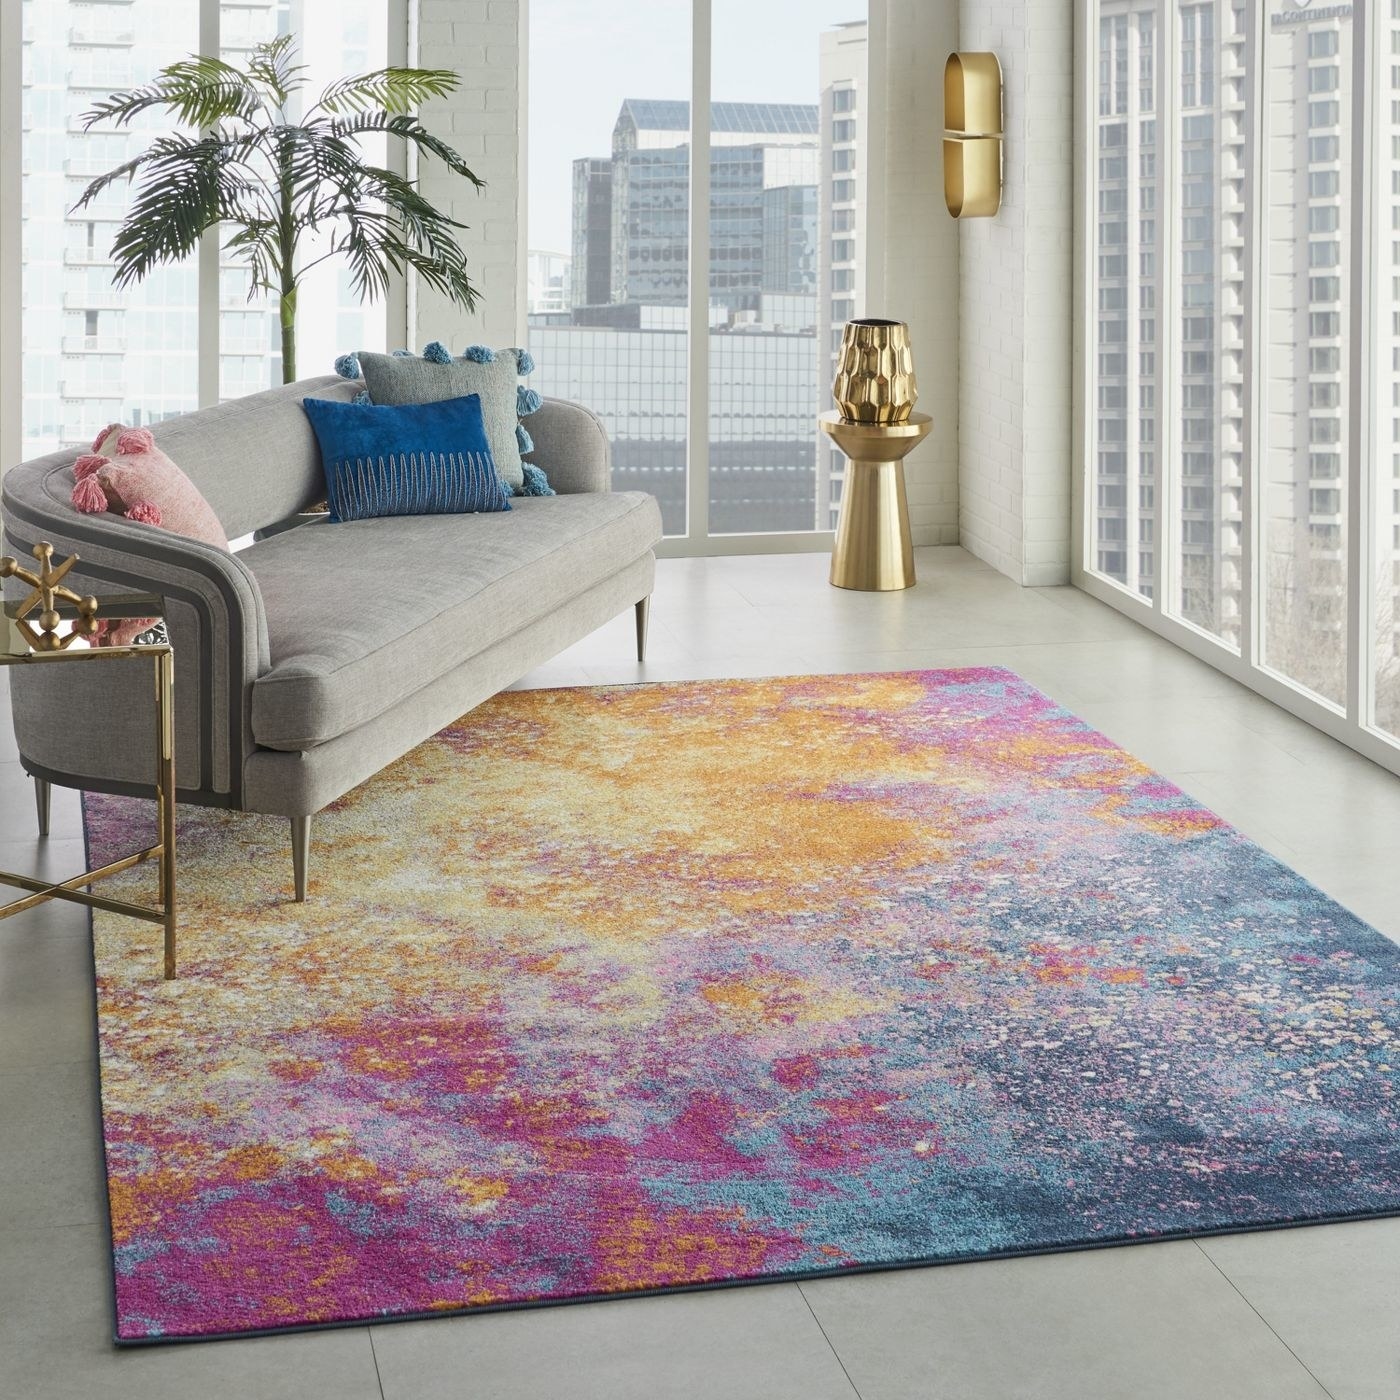 The yellow, pink, and blue rug